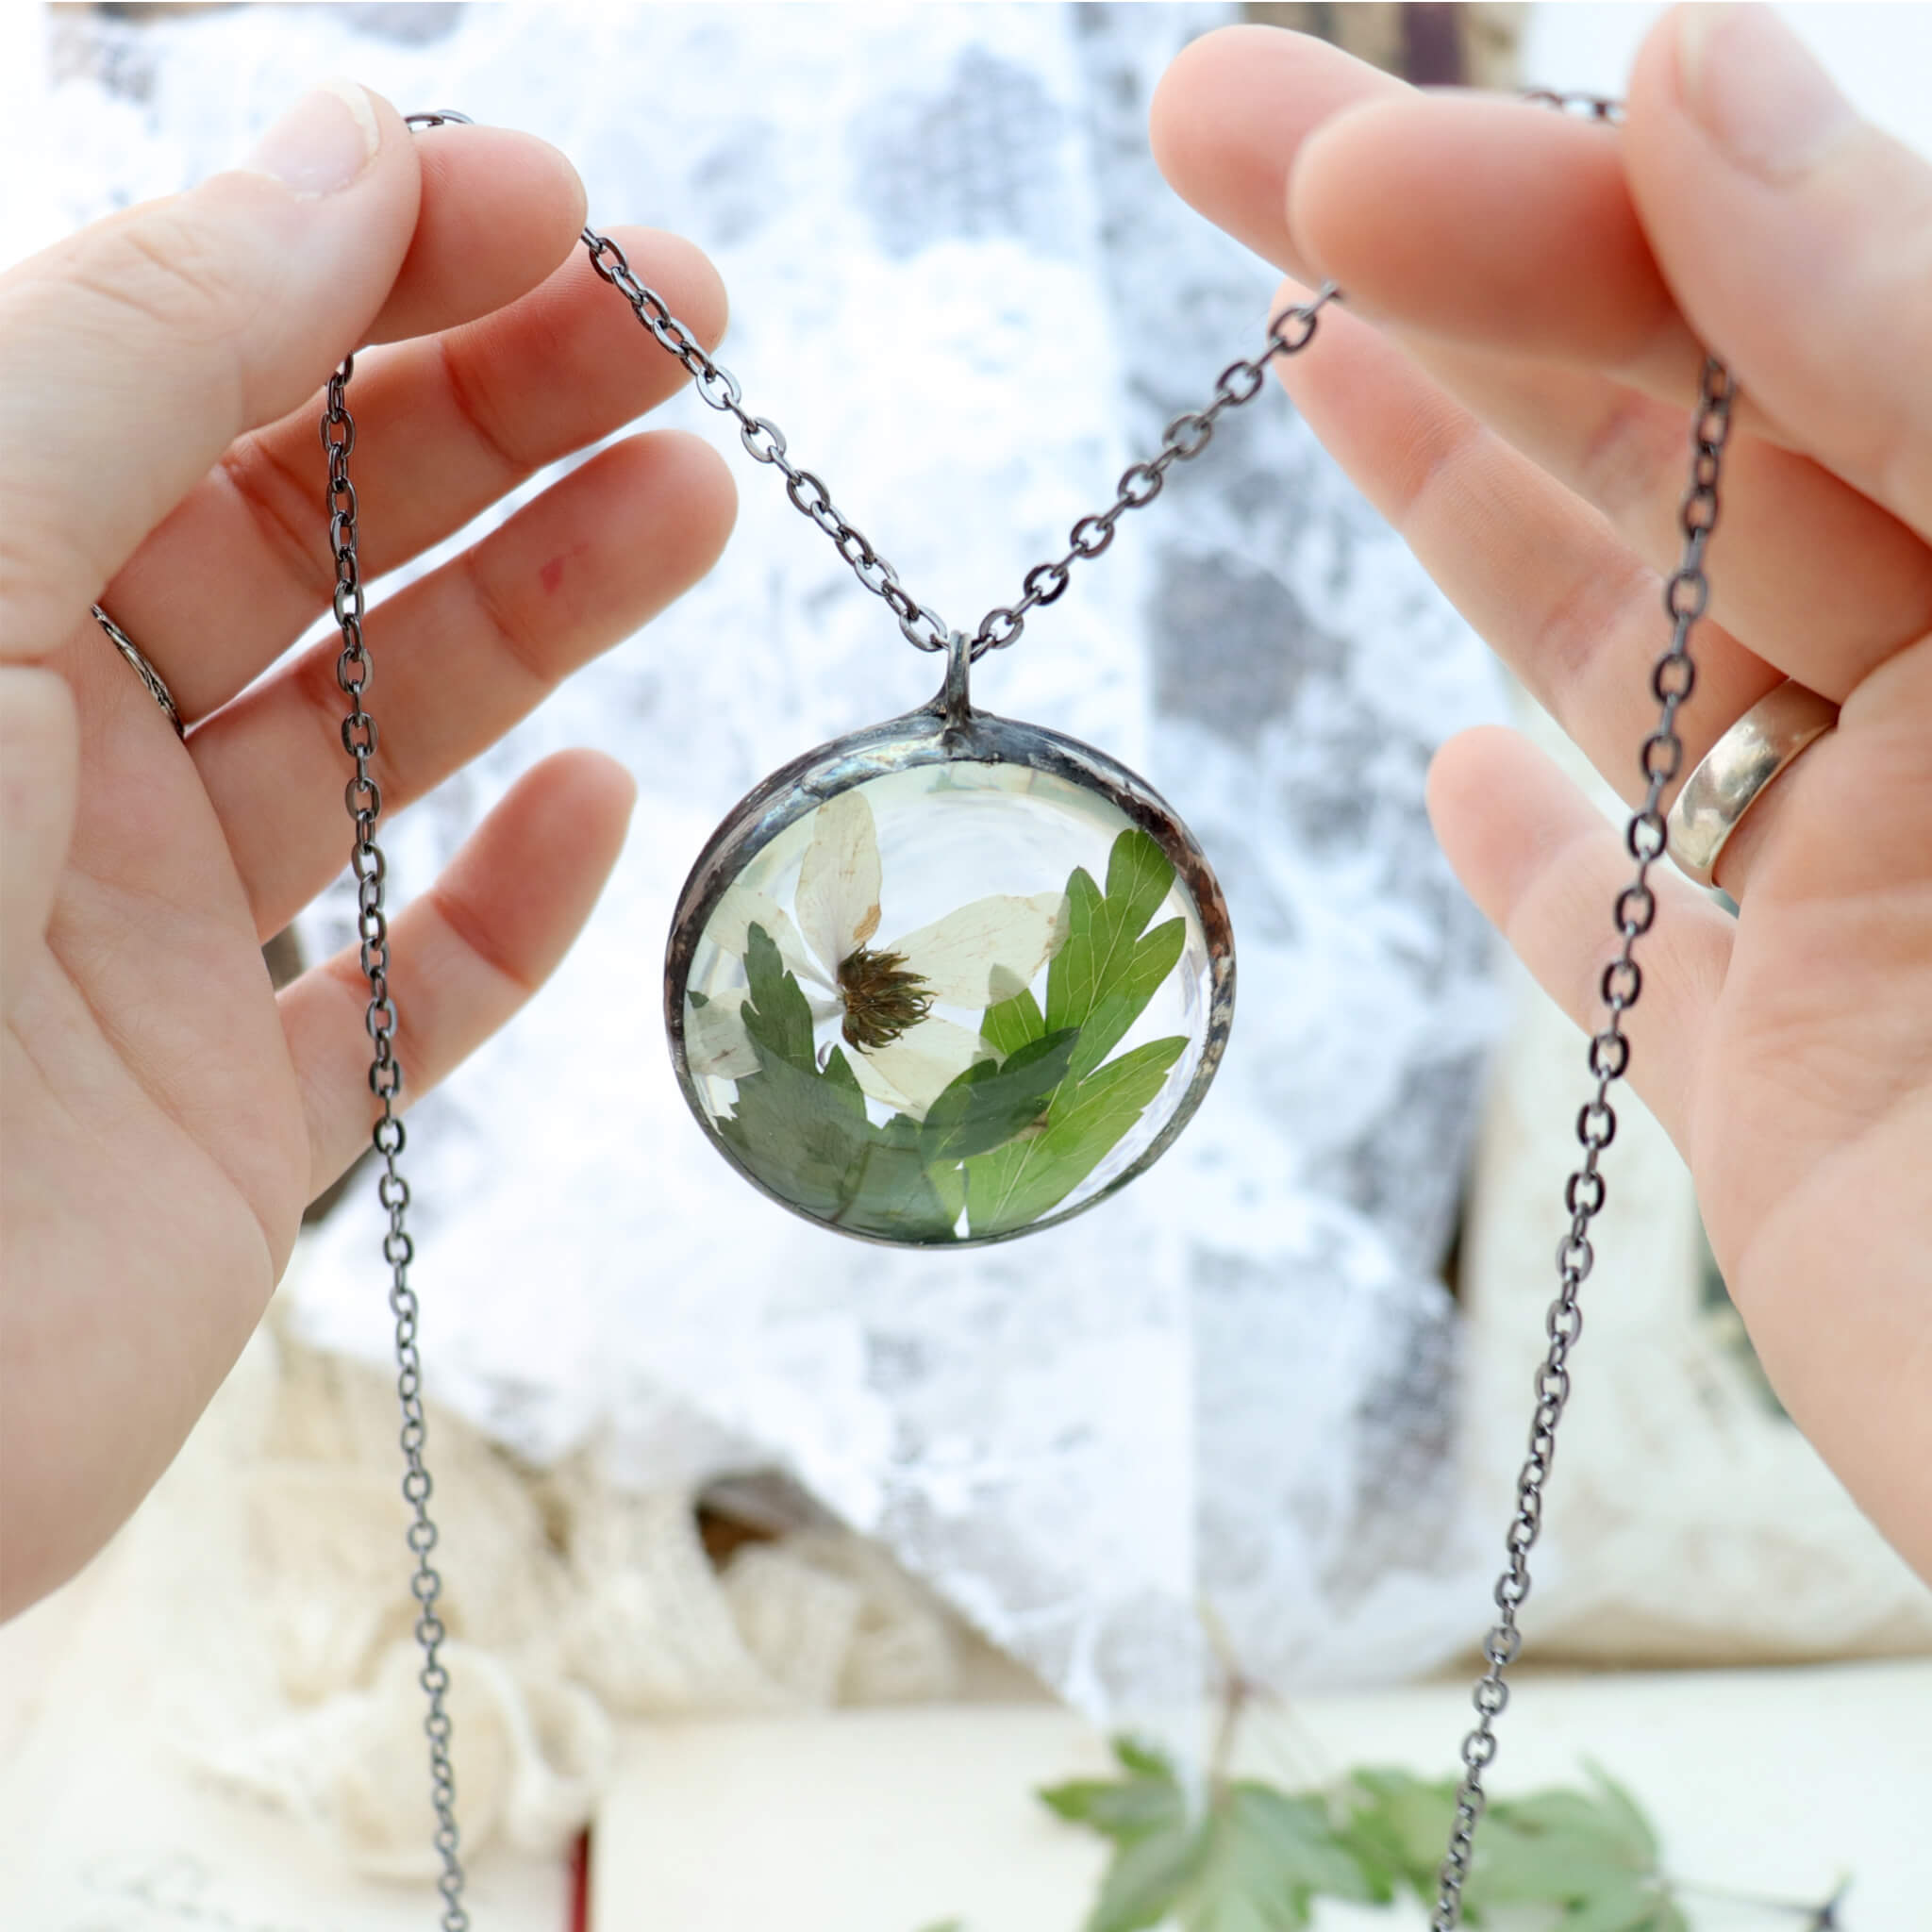 Hands holding round shaped necklace featuring pink pressed flowers with green leaves